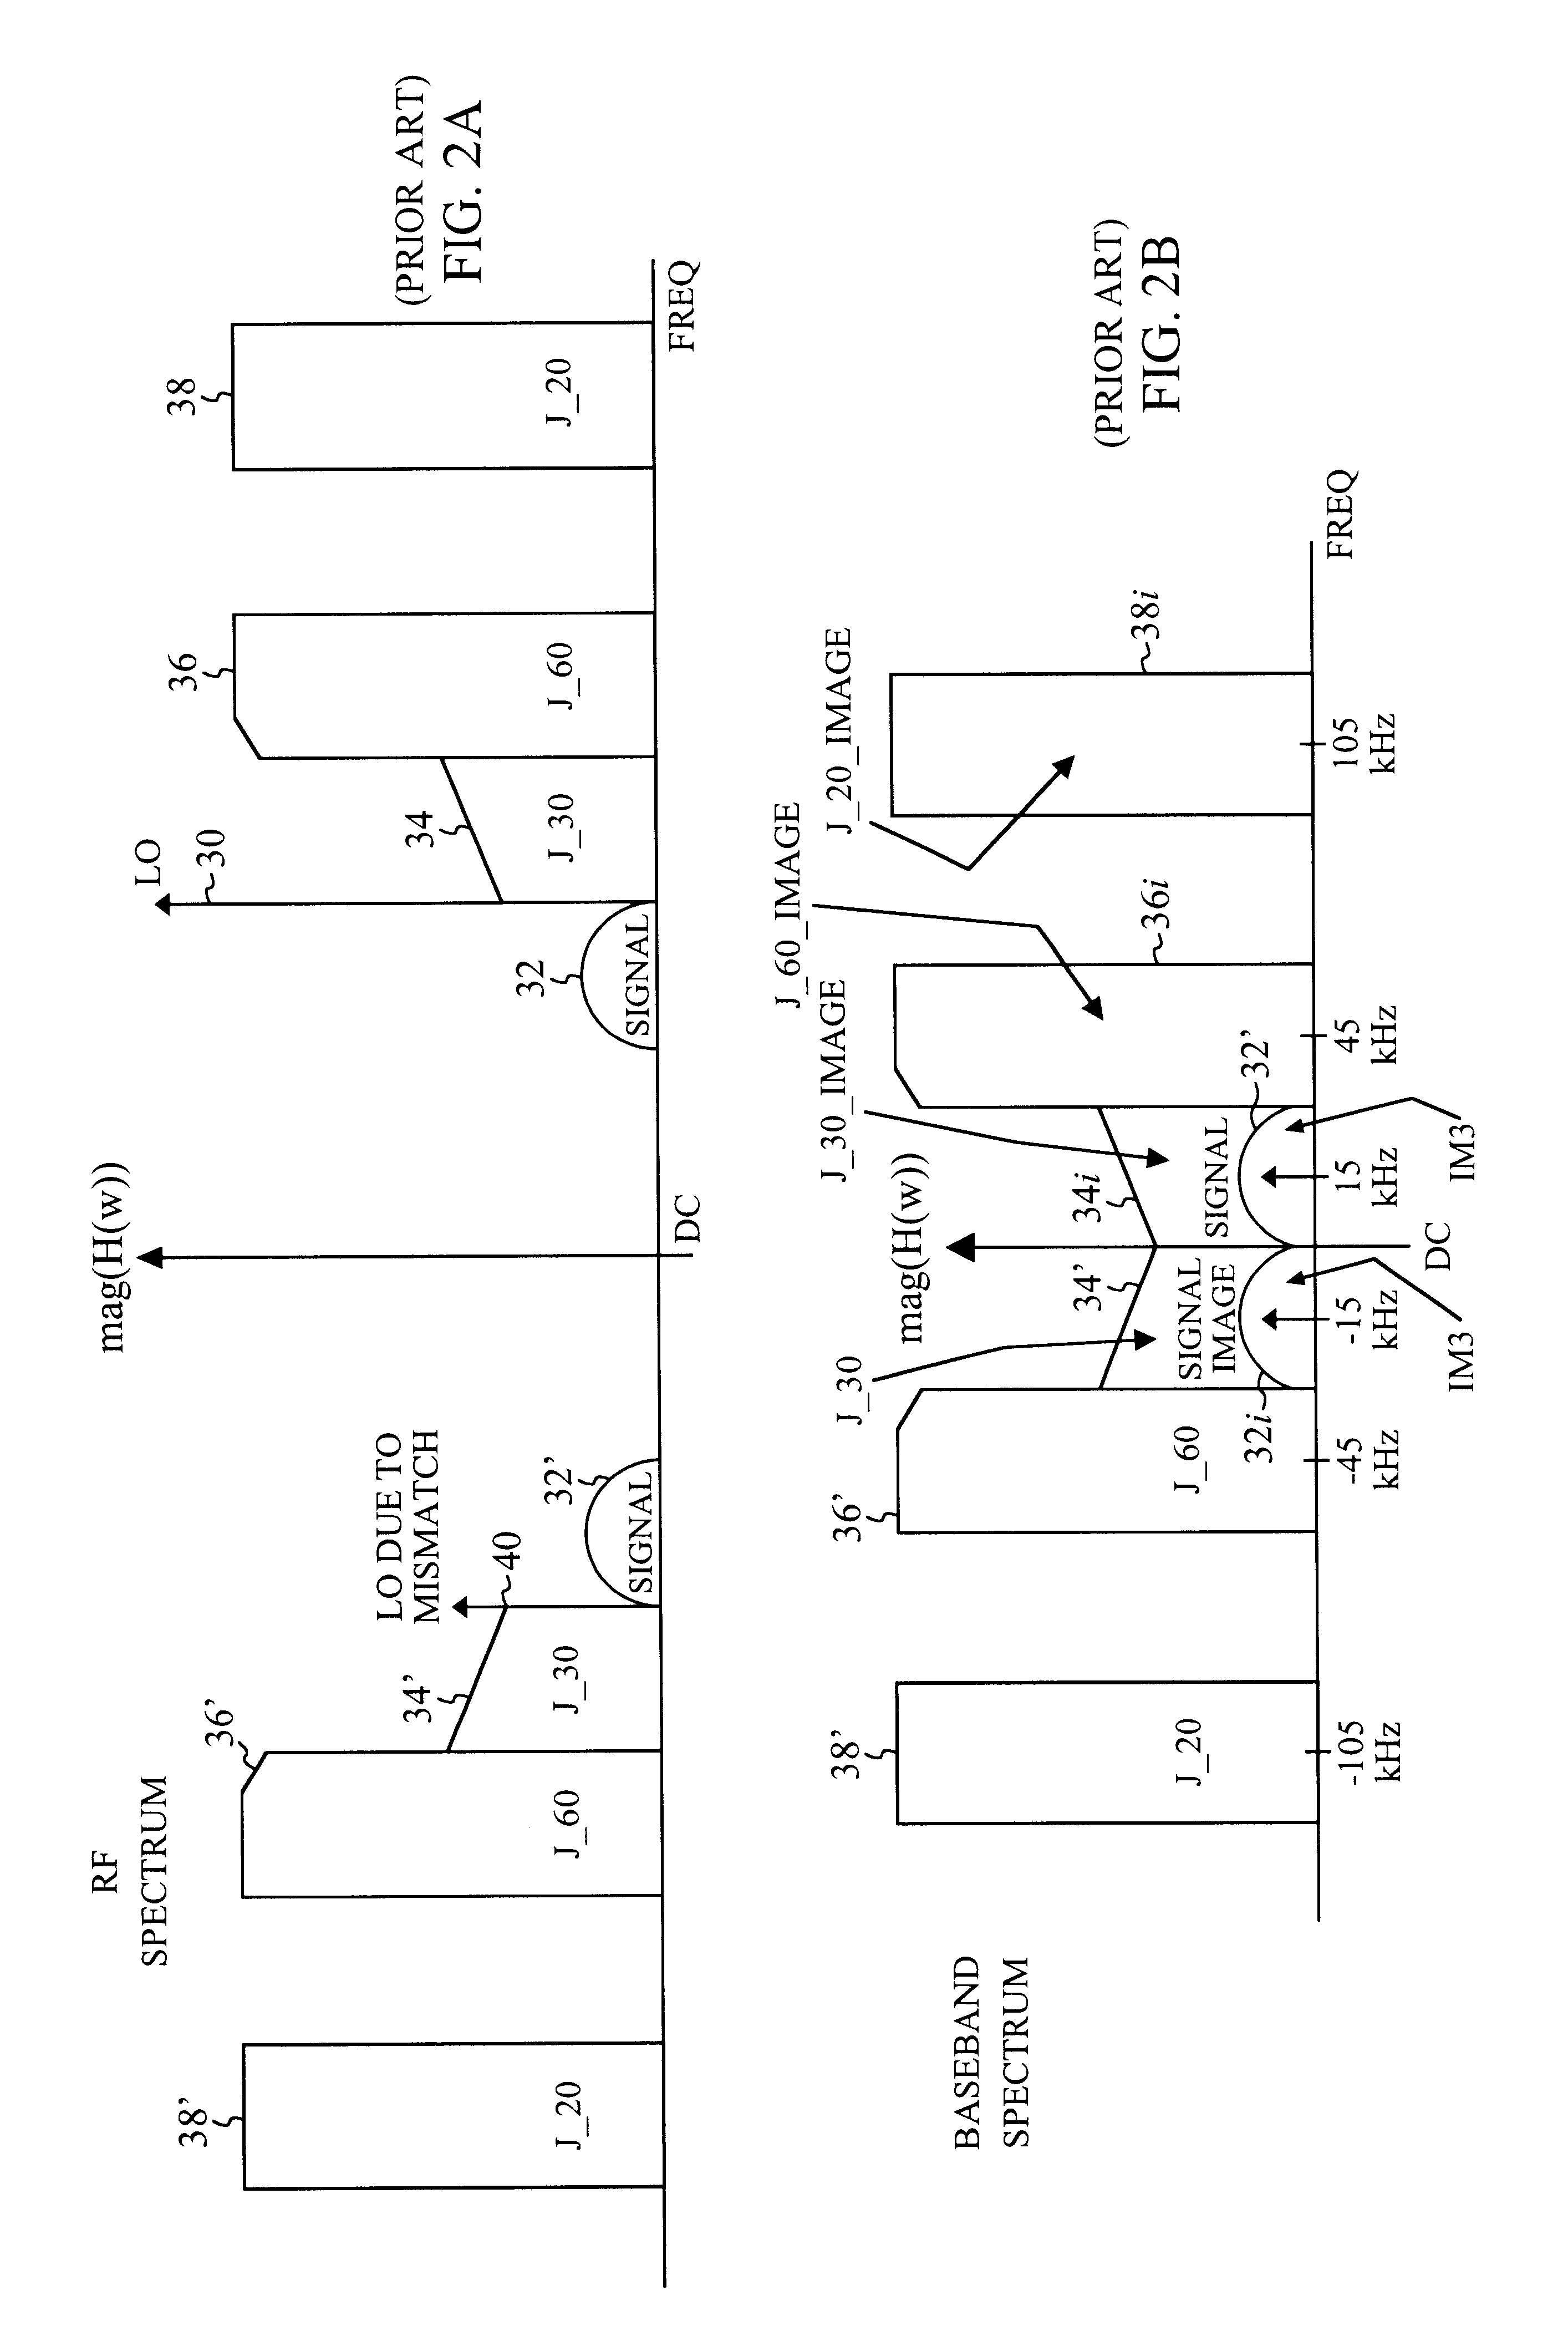 System and method for I-Q mismatch compensation in a low IF or zero IF receiver